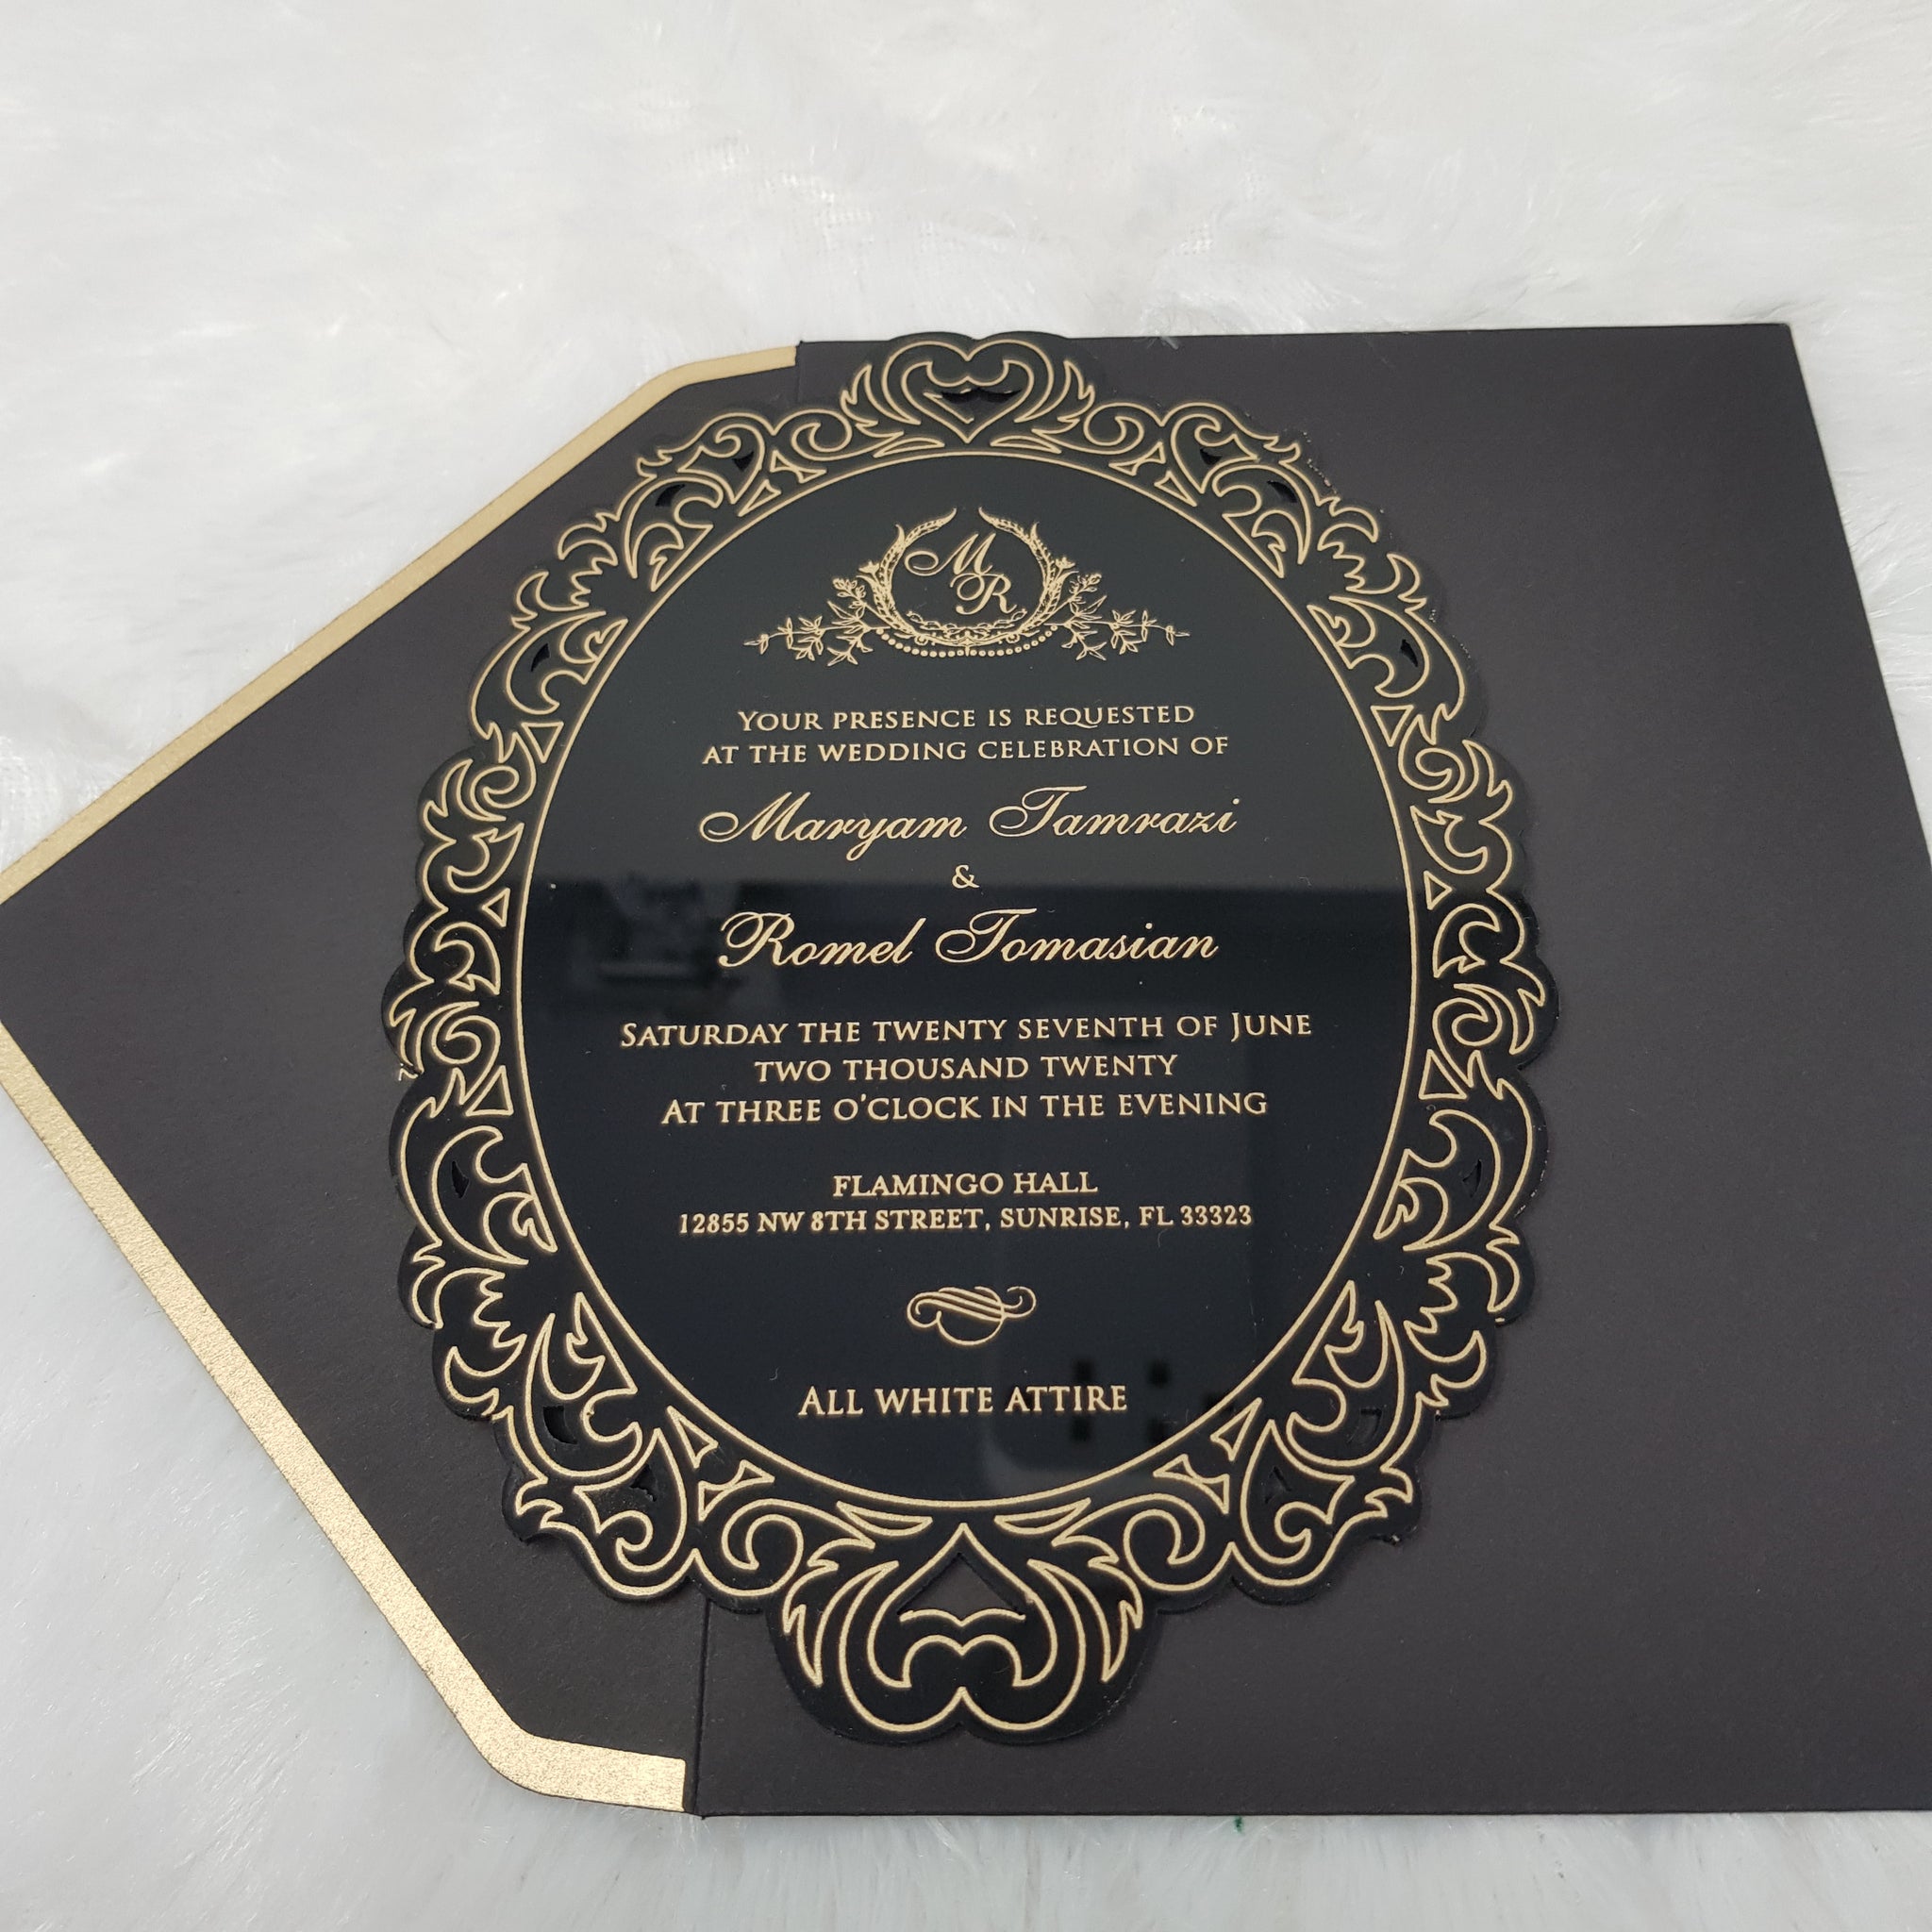 EVERYTHING YOU NEED TO KNOW ABOUT ACRYLIC WEDDING INVITATIONS – My Printman